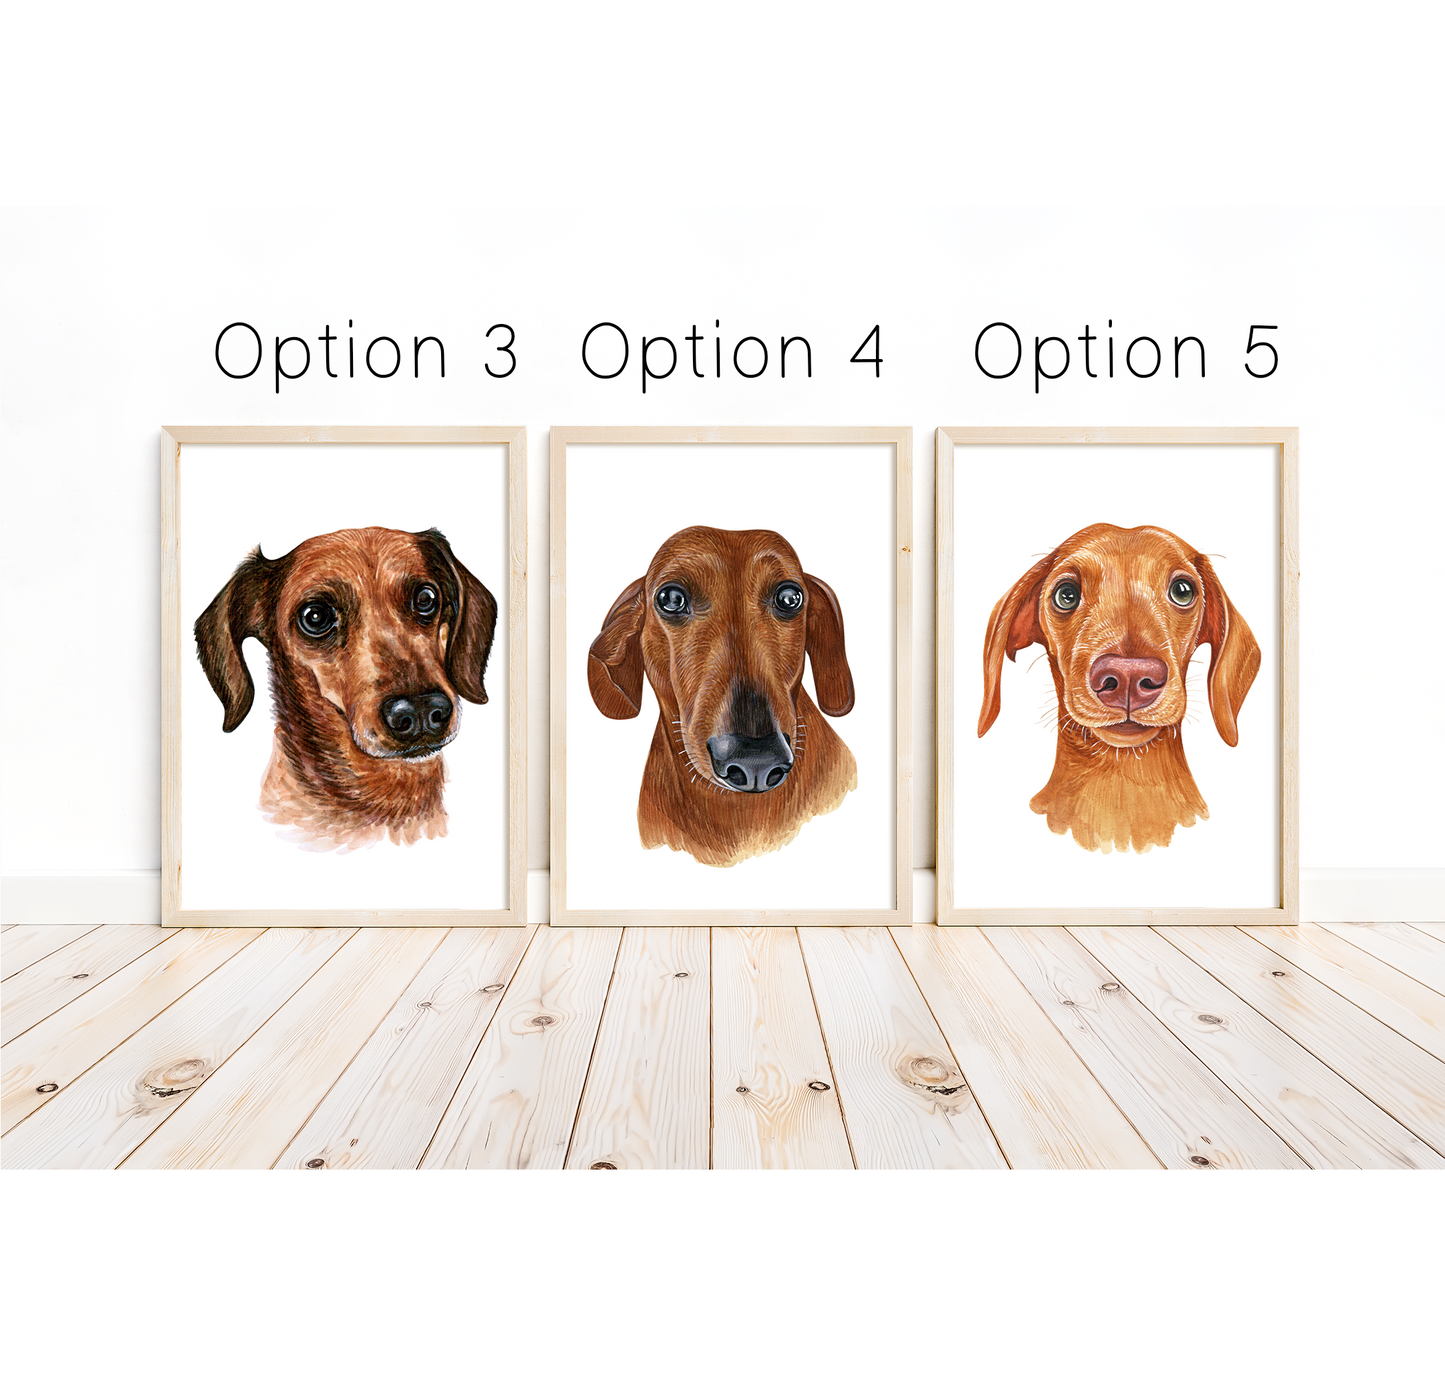 Dachshund artwork - charming dog or puppy portrait with custom funny or heart warming message | A4 | A5 | Greeting card